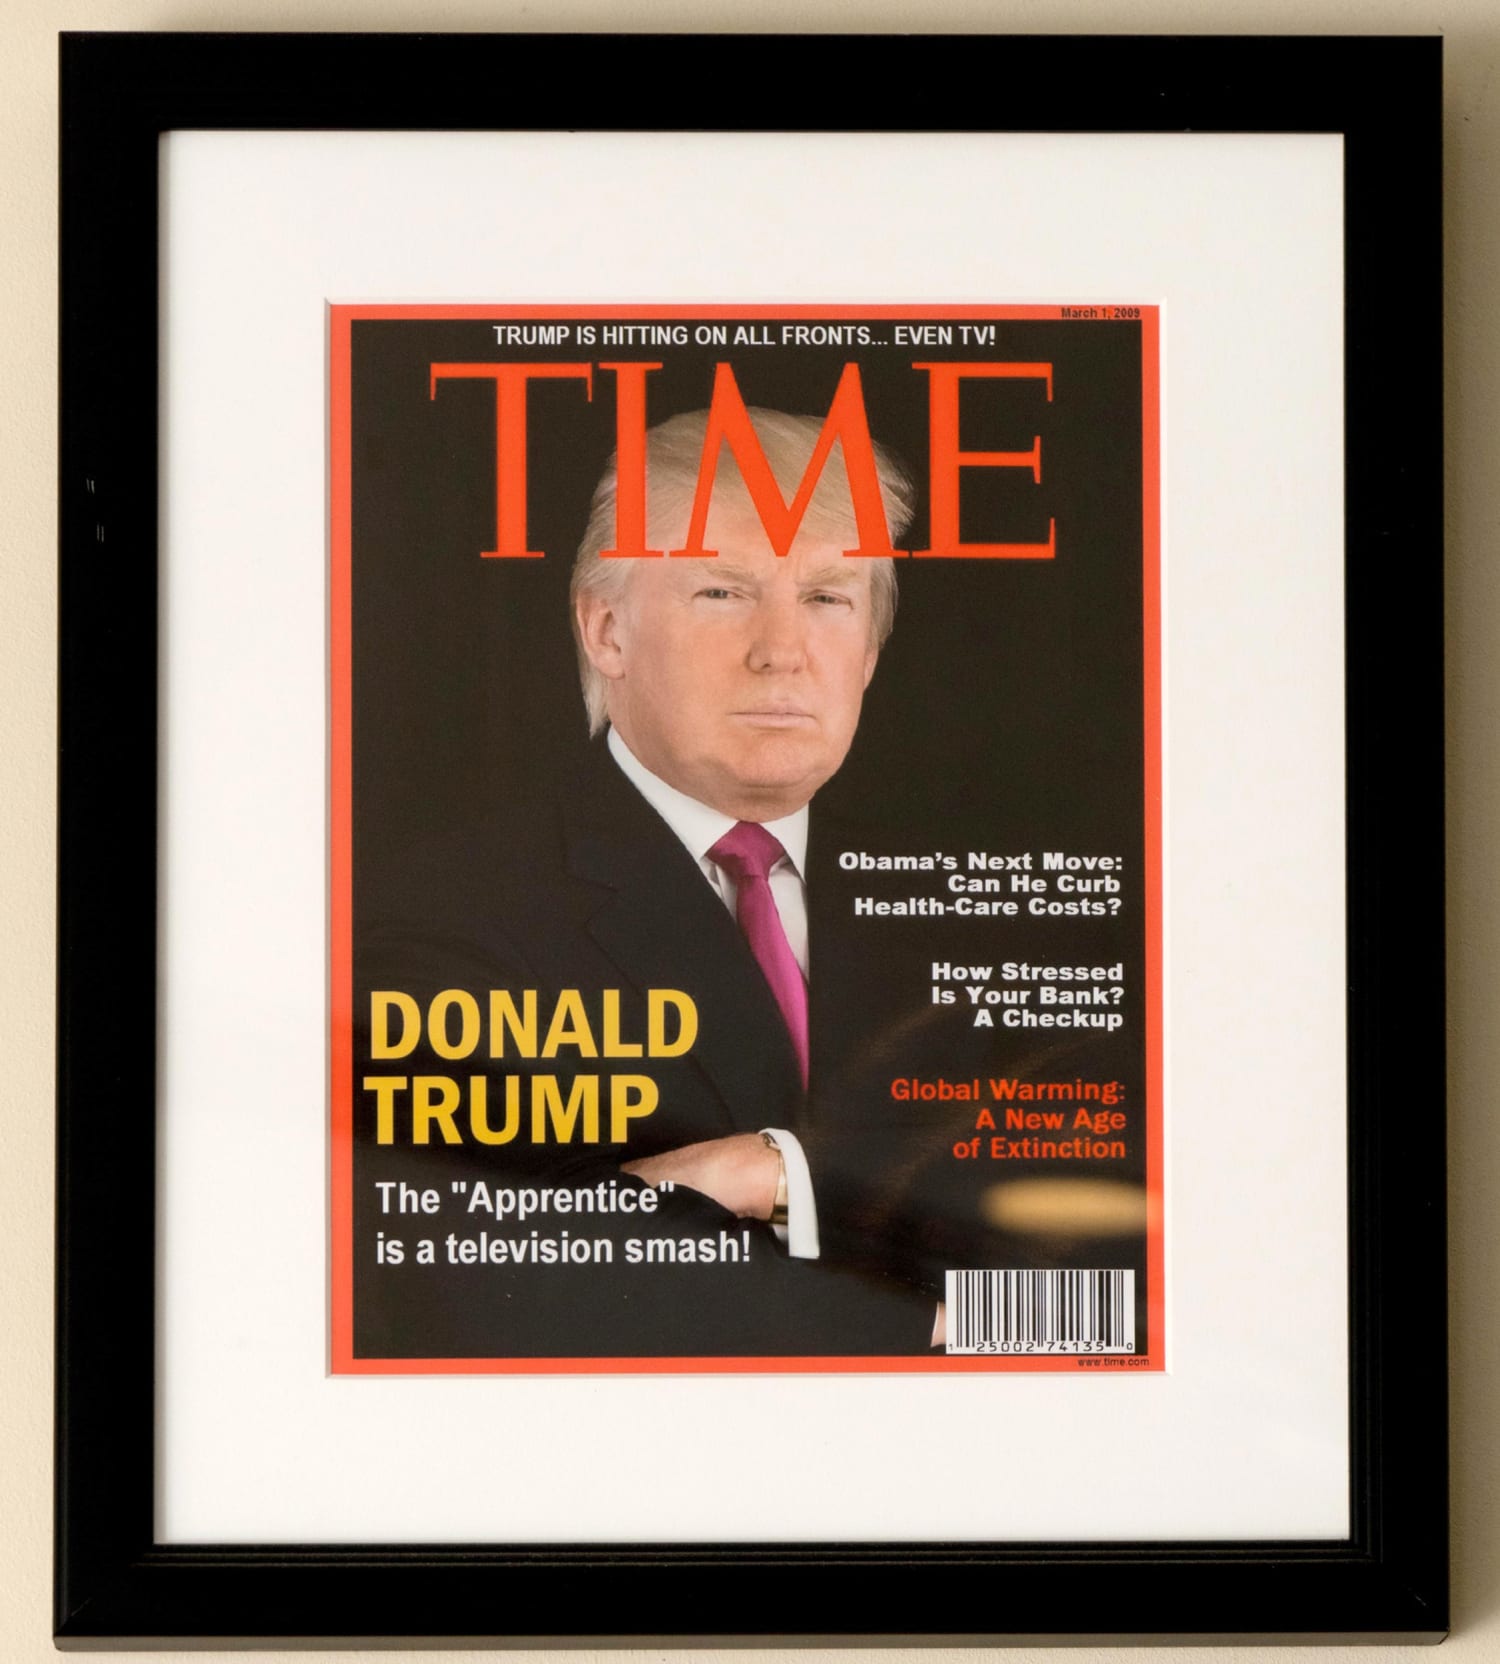 Time Magazine disputes President Trump's 'Person of